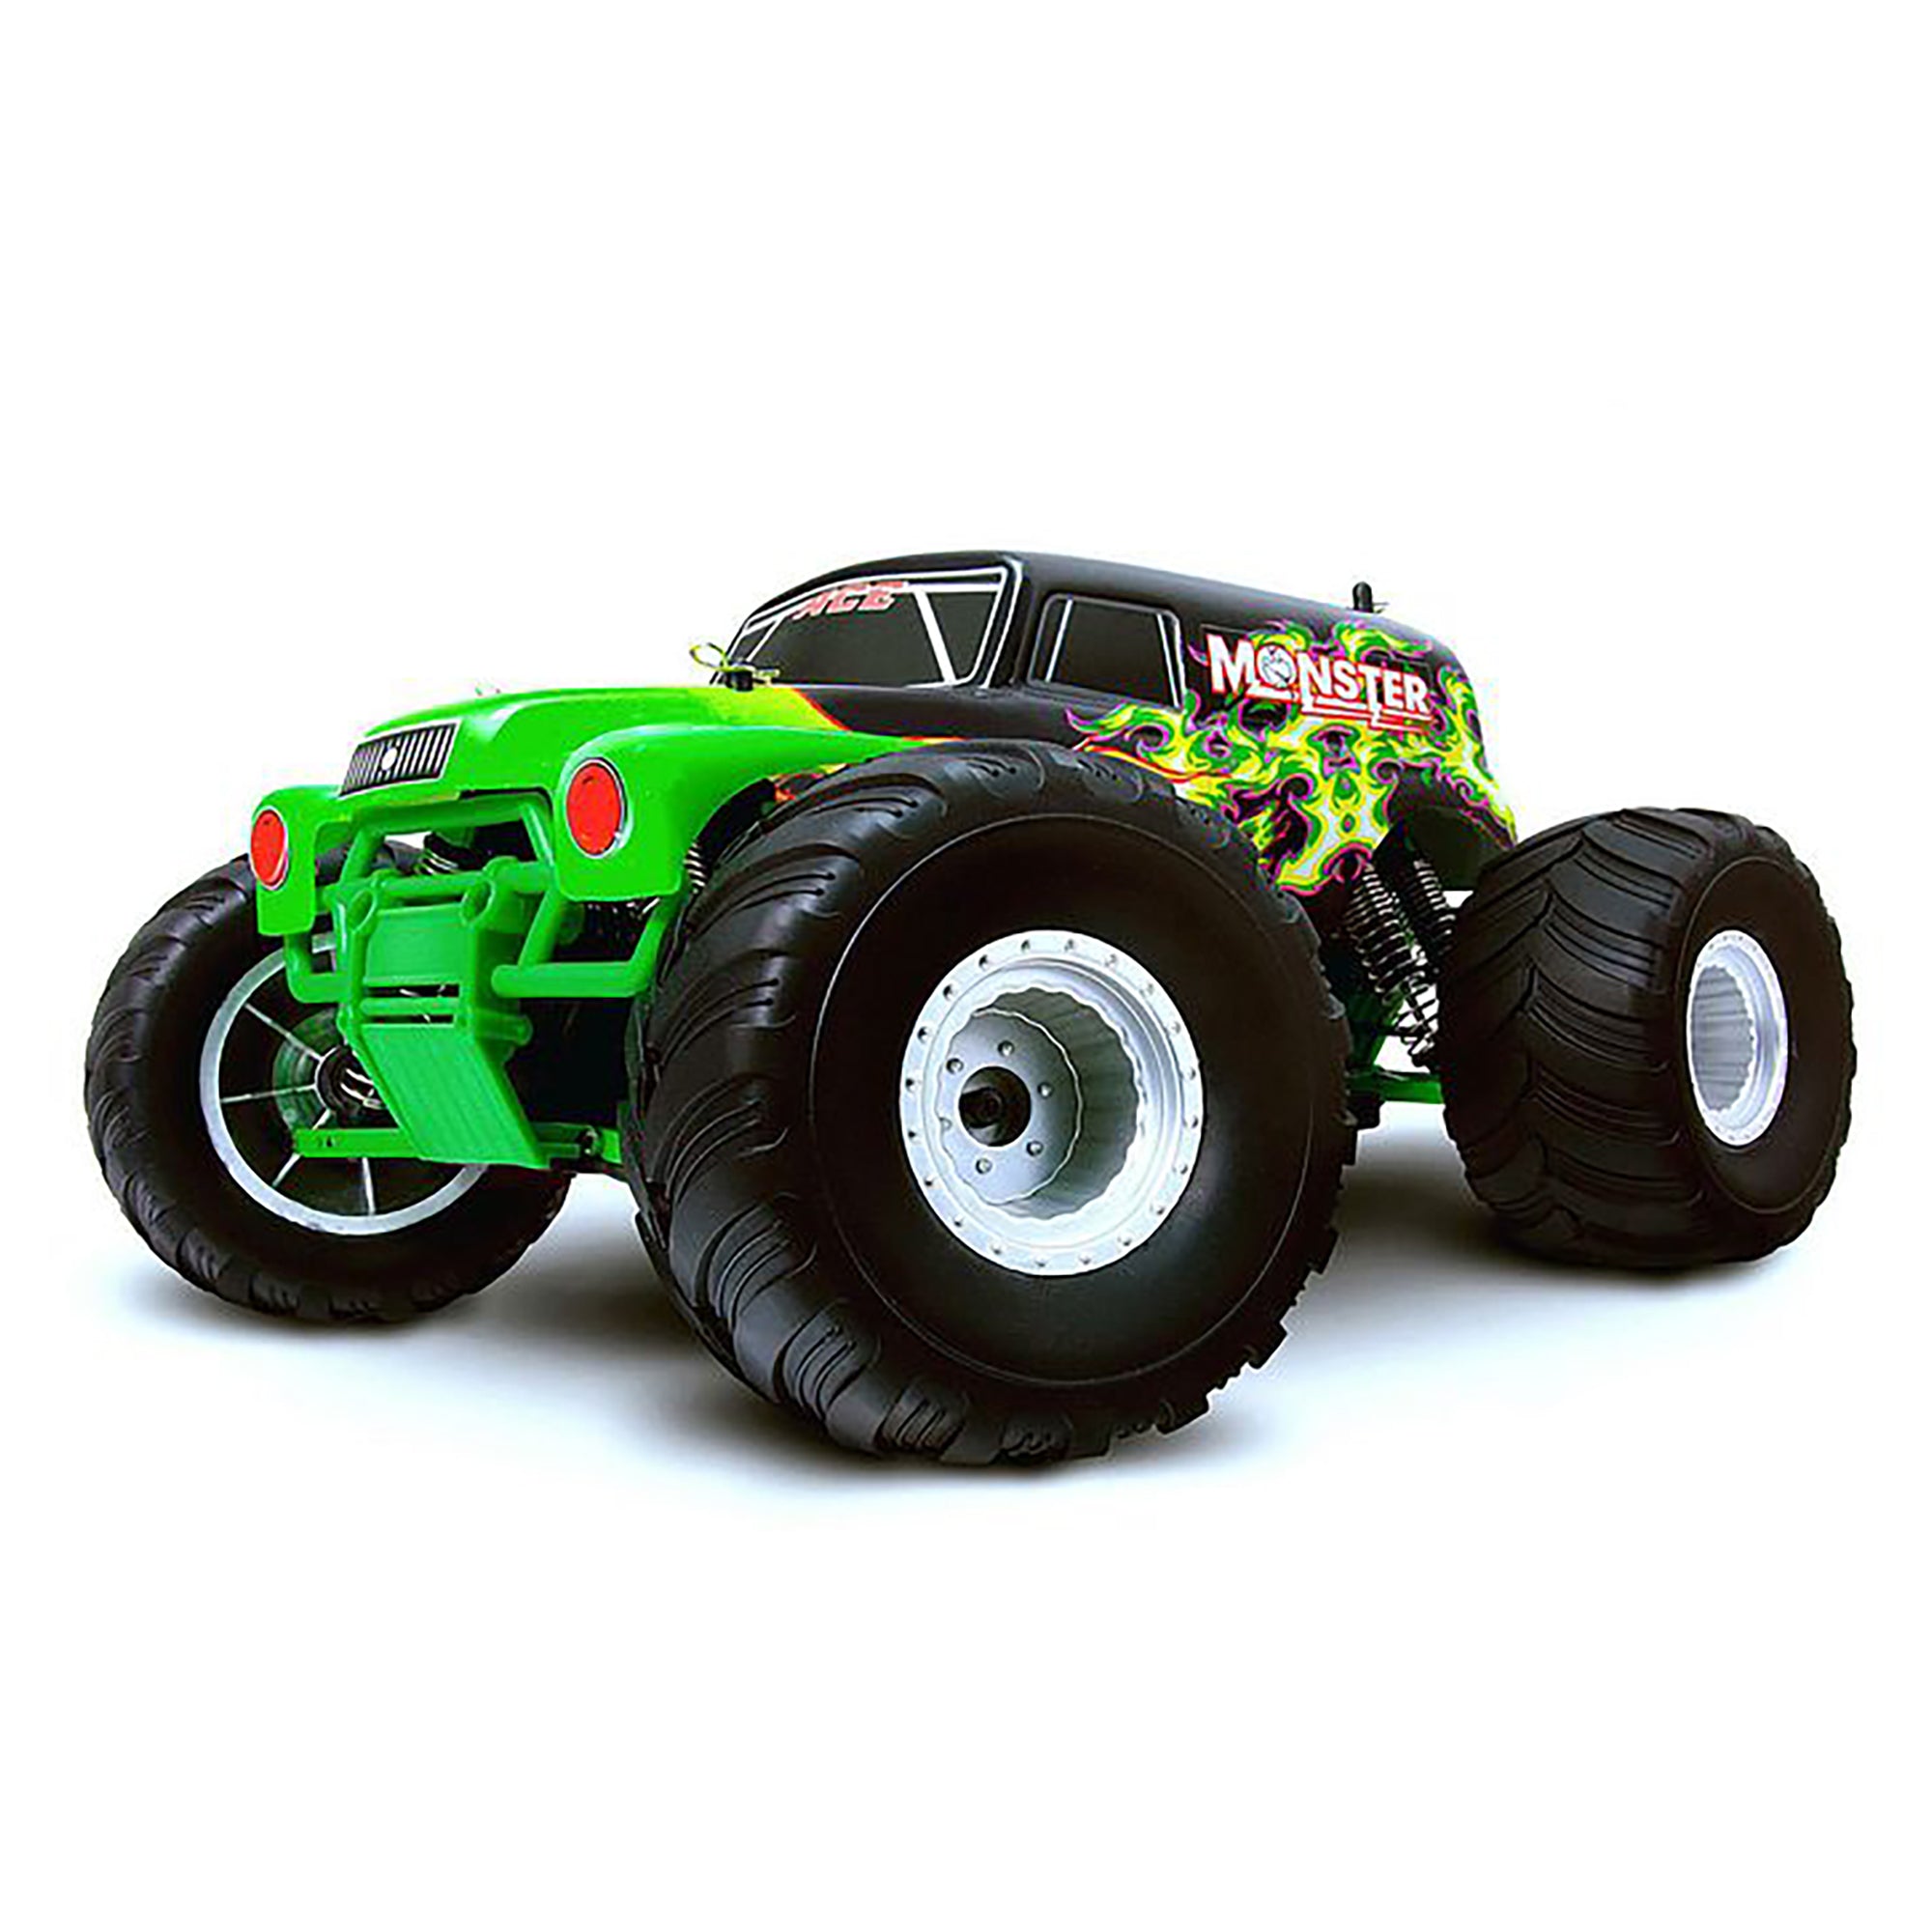 HSP Racing ACE Monster Truck Special Edition Green 2.4GHz Brushless 4WD Off Road RTR RC Truck